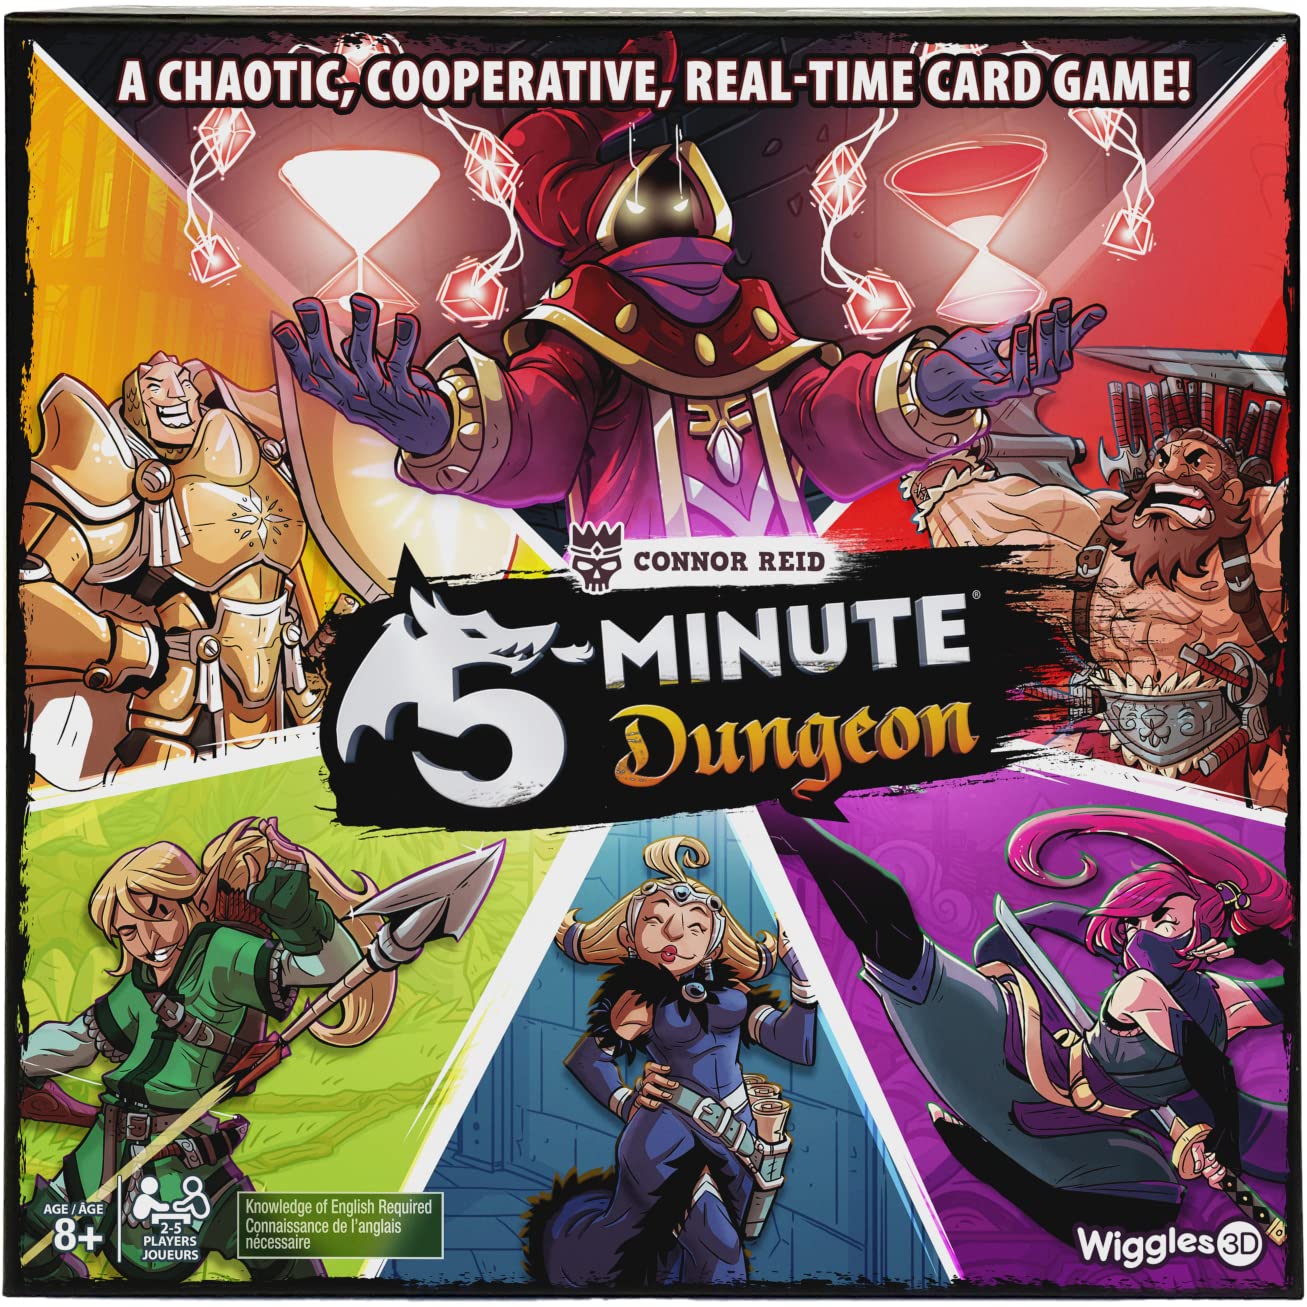 Wiggles 3D 5-Minute Dungeon by Wiggles 3D  A chaotic, co-Operative, Real-time card game  Fast-Paced Board game  for Families, Ages 8 & up  